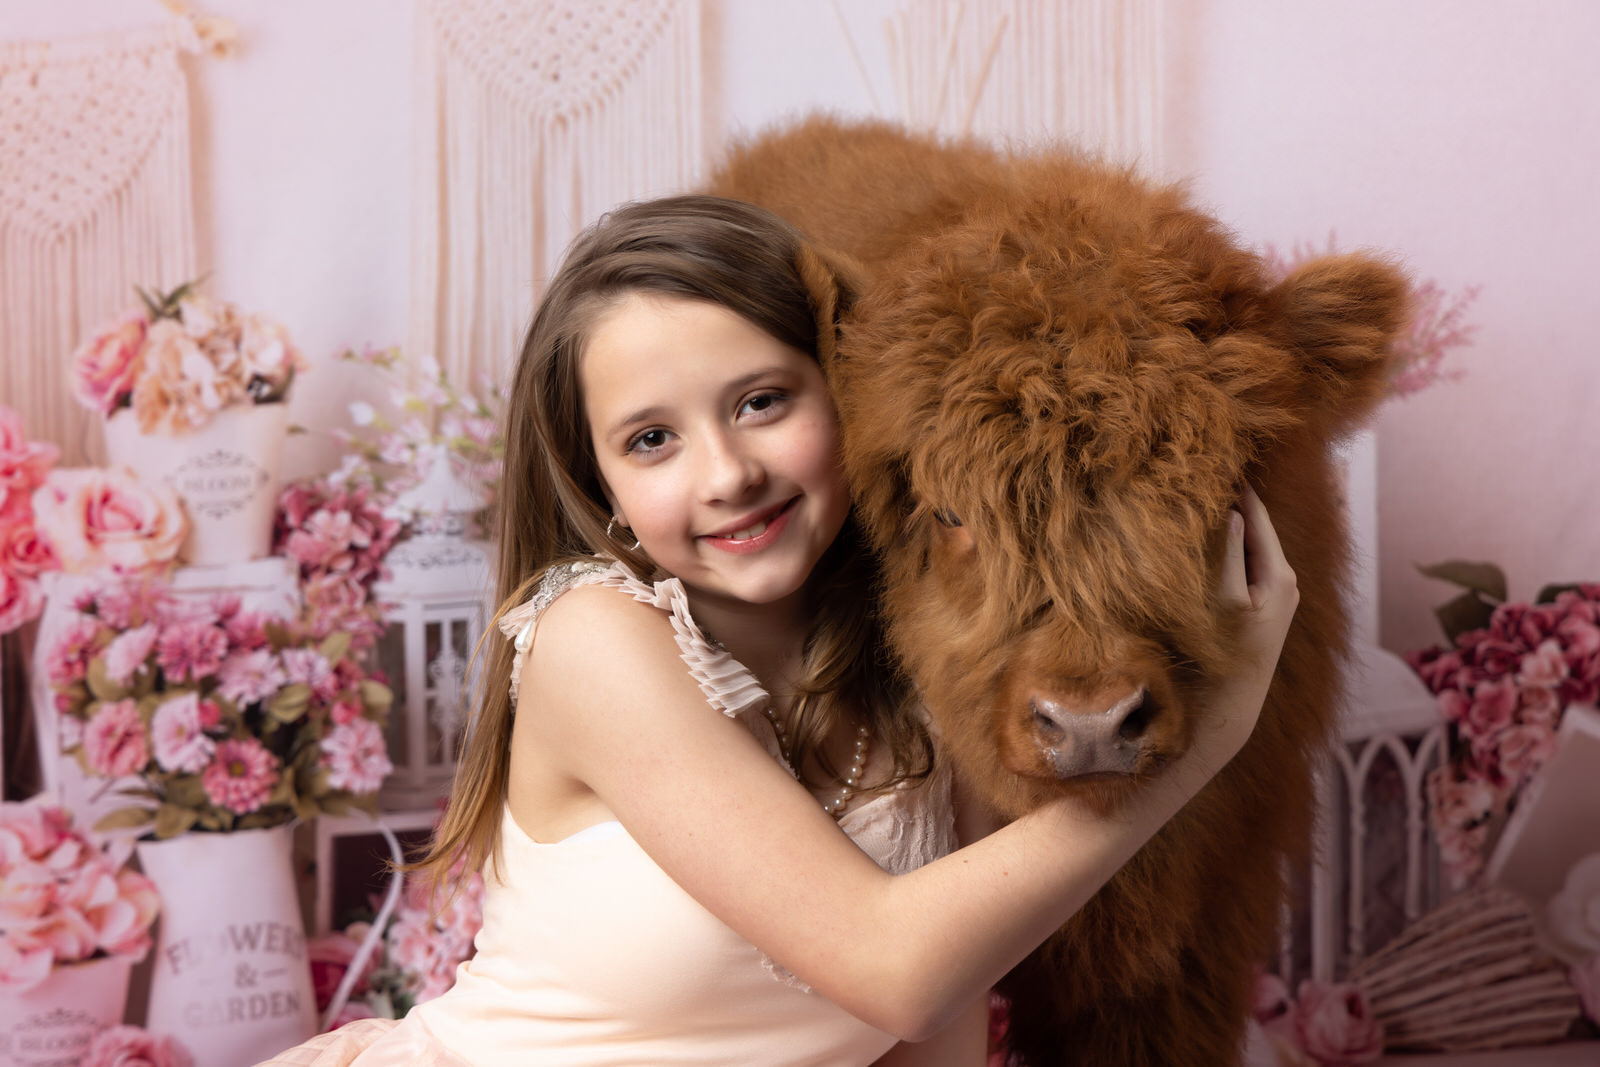 A young girl in a beige dress hugs the face of a fuzzy cow in a studio